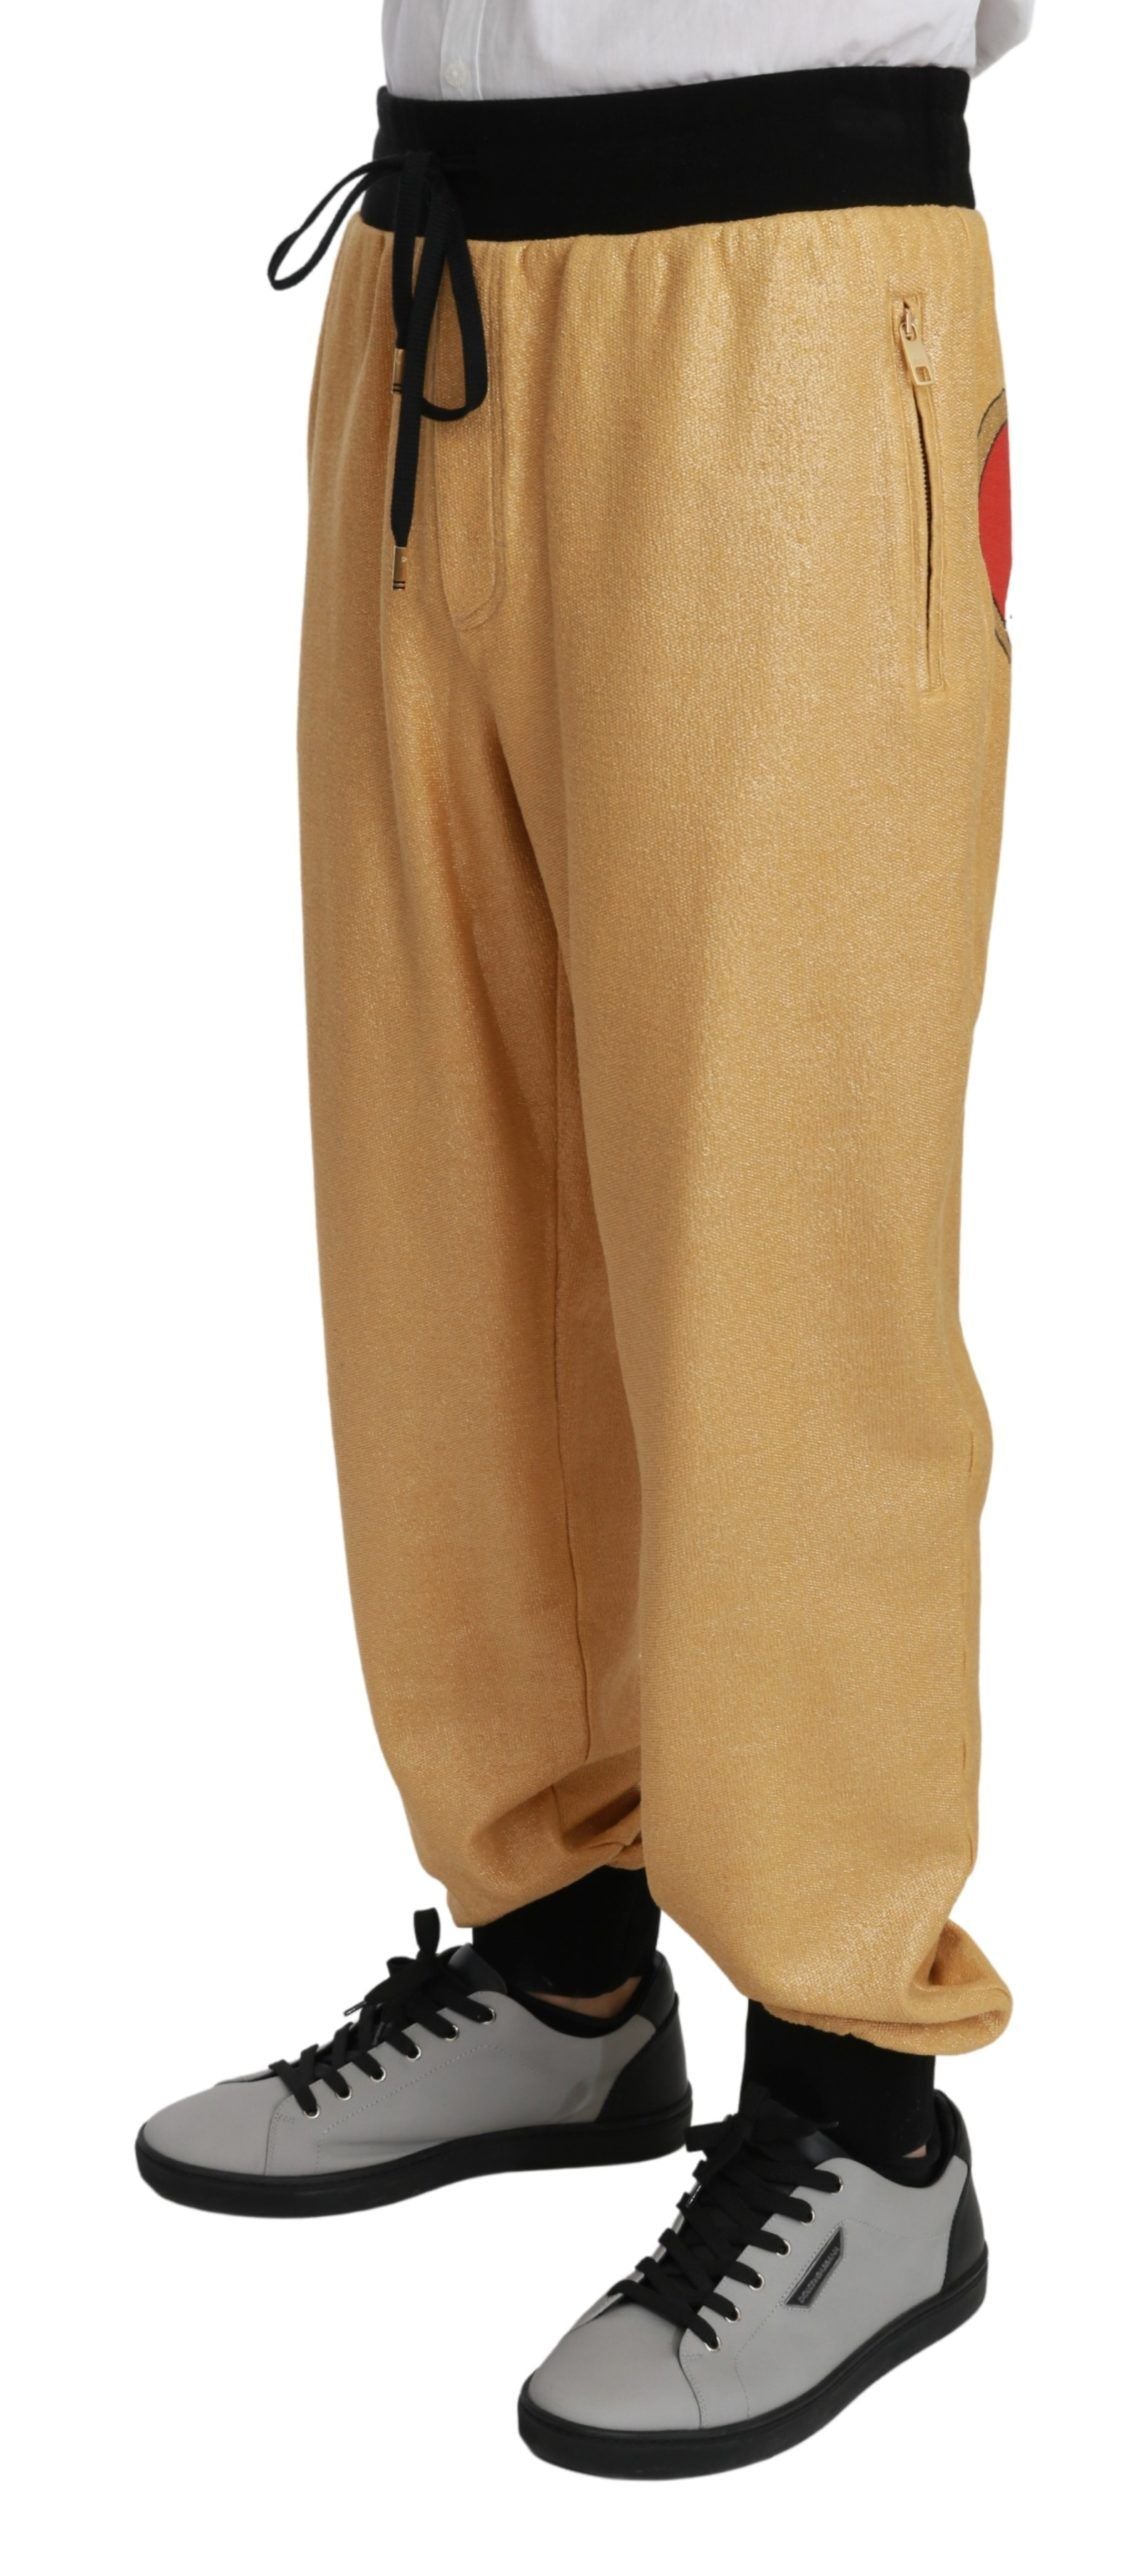 Dolce & Gabbana Gold Year Of The Pig Cotton Mens Pants